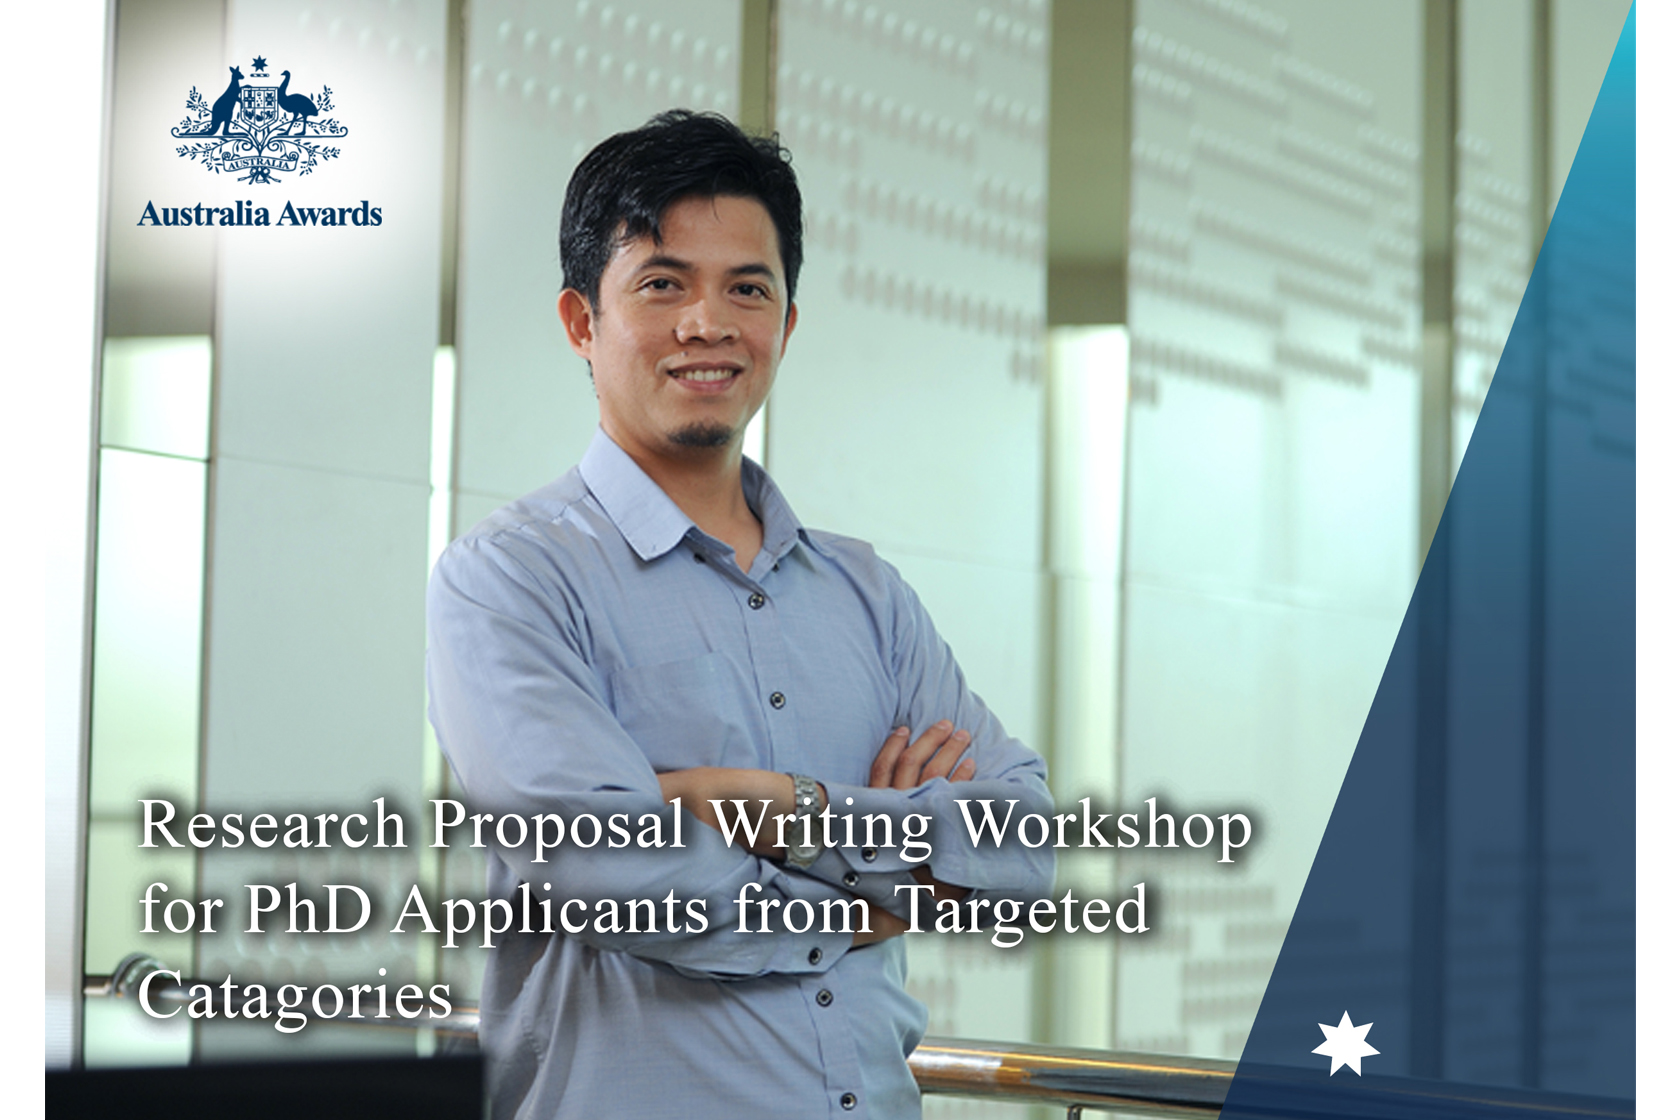 Applications Open for “Research Proposal Writing Workshop”!